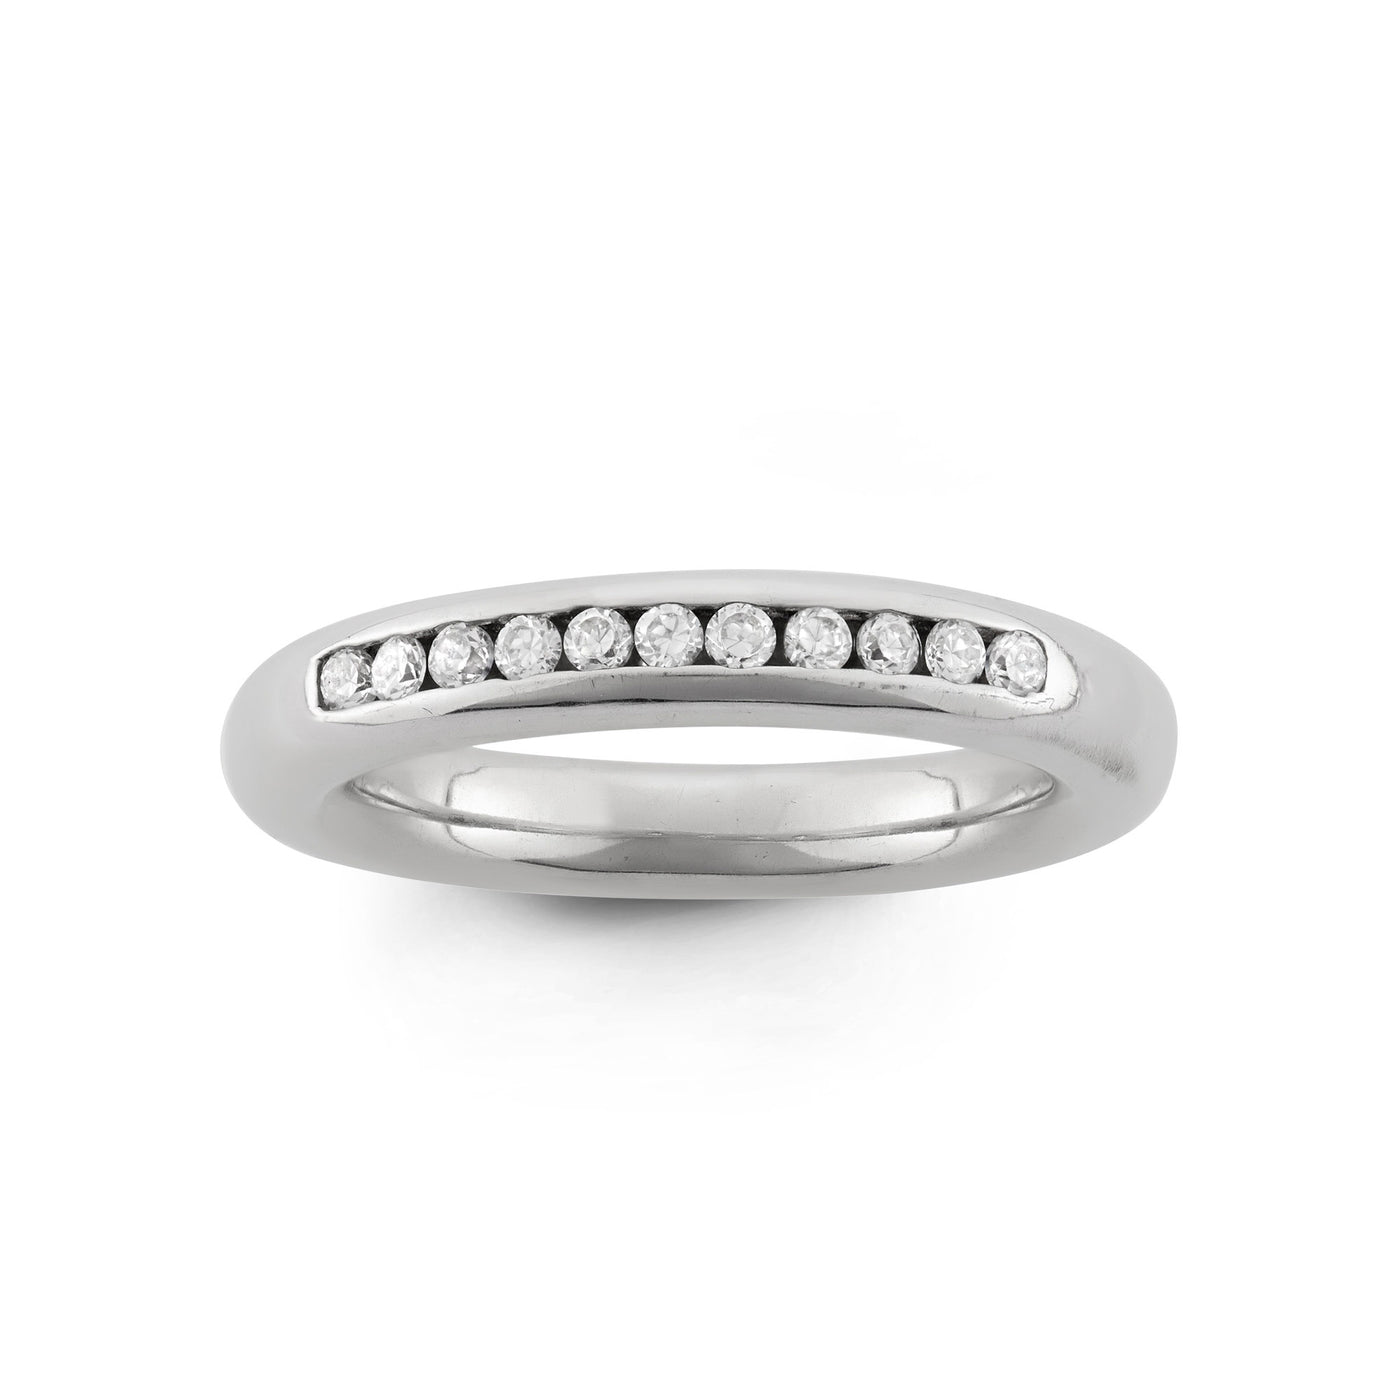 Rebecca Sloane Silver Spinning Ring With Row Of White Set CZ